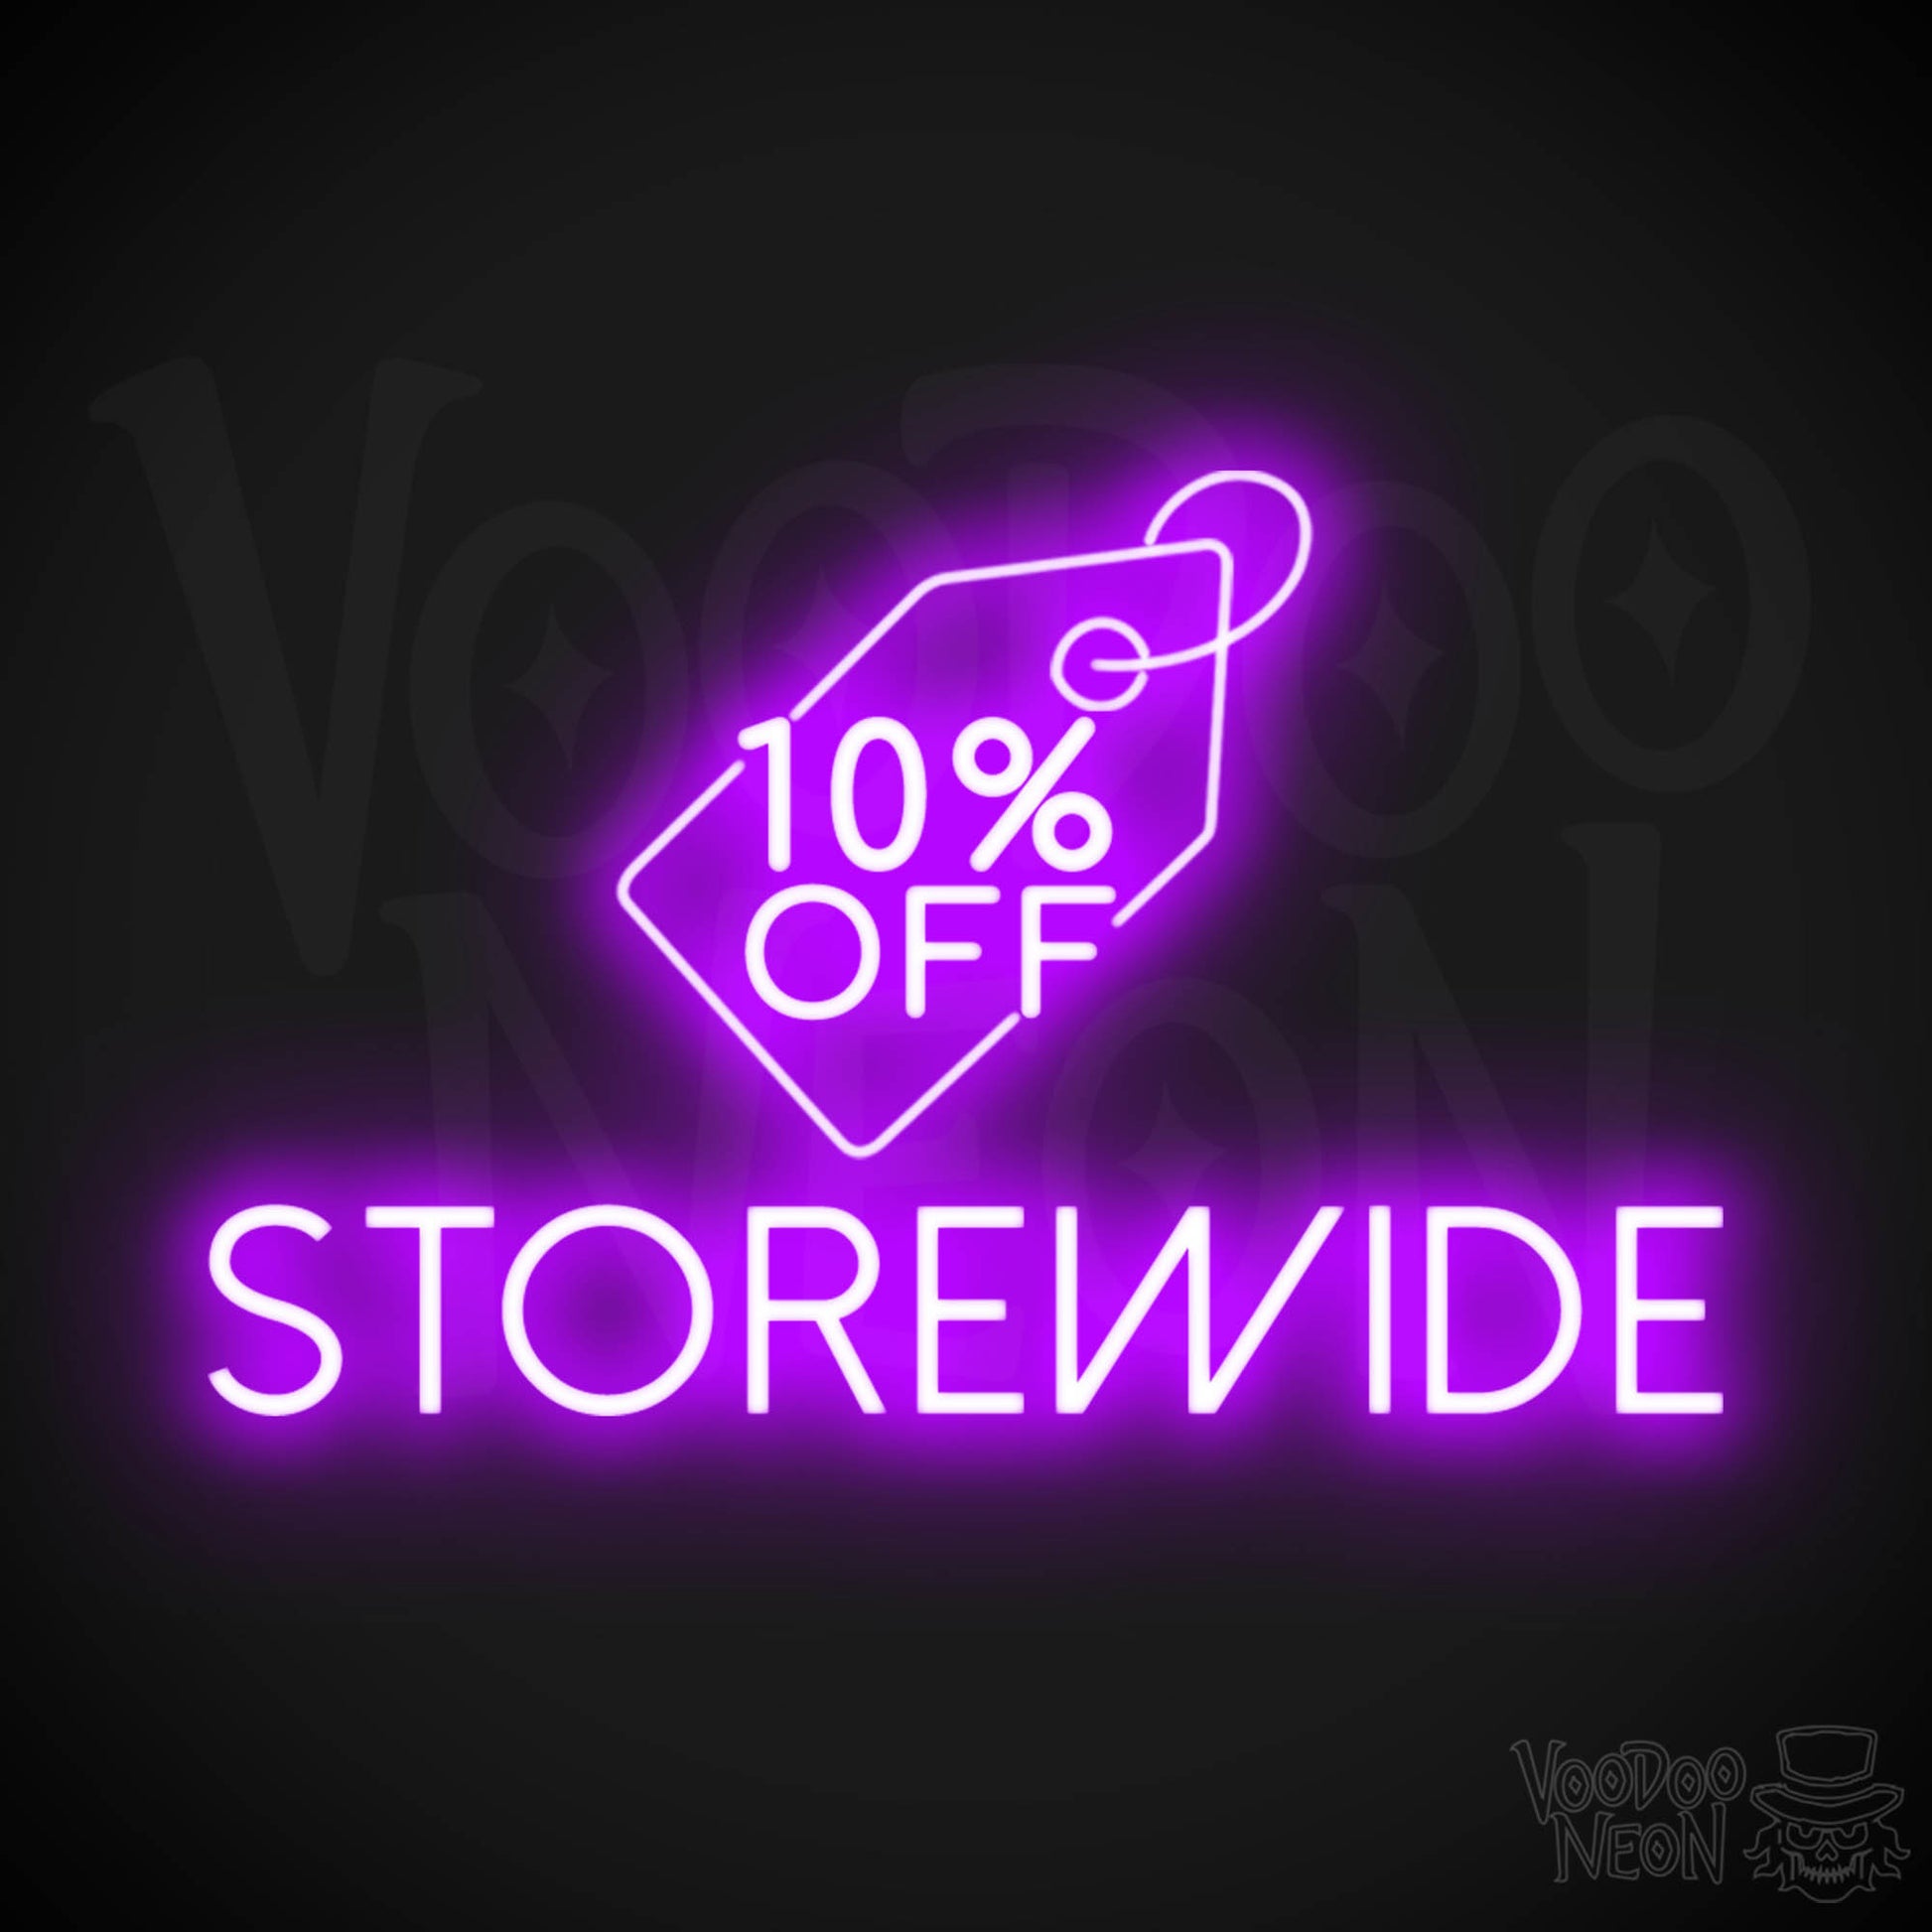 10% Off Storewide Neon Sign - 10% Off Storewide Sign - Neon Shop Signs - Color Purple